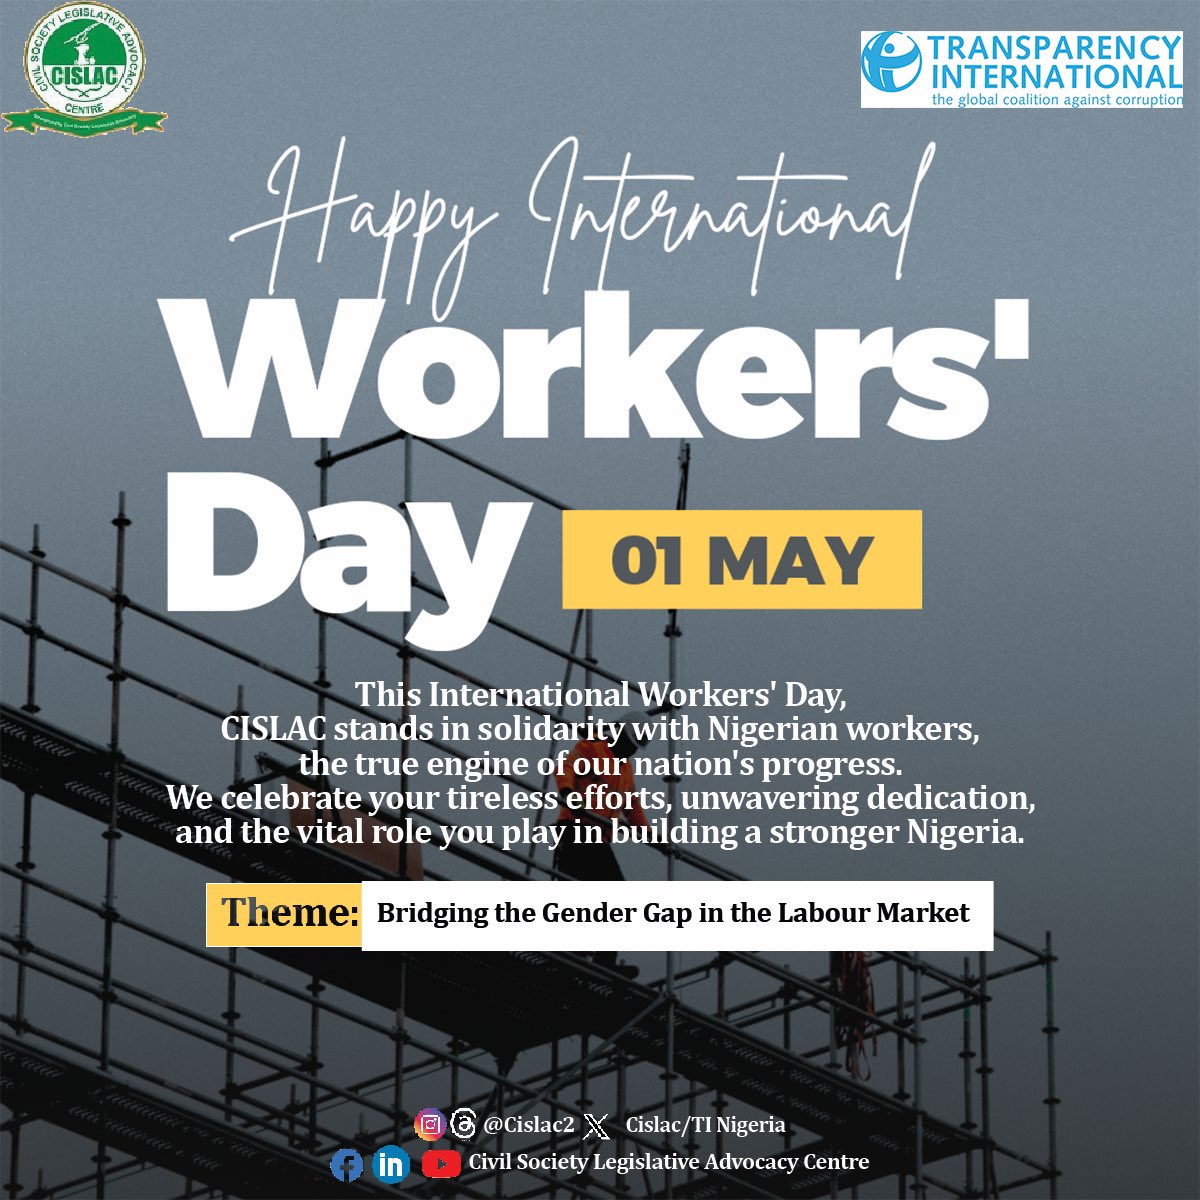 Today, on International Workers' Day, we celebrate the achievements and contributions of workers everywhere. May your hard work be recognized and valued, and may you enjoy a safe and healthy work environment. Let's also take this day to reflect on how we can continue to fight for